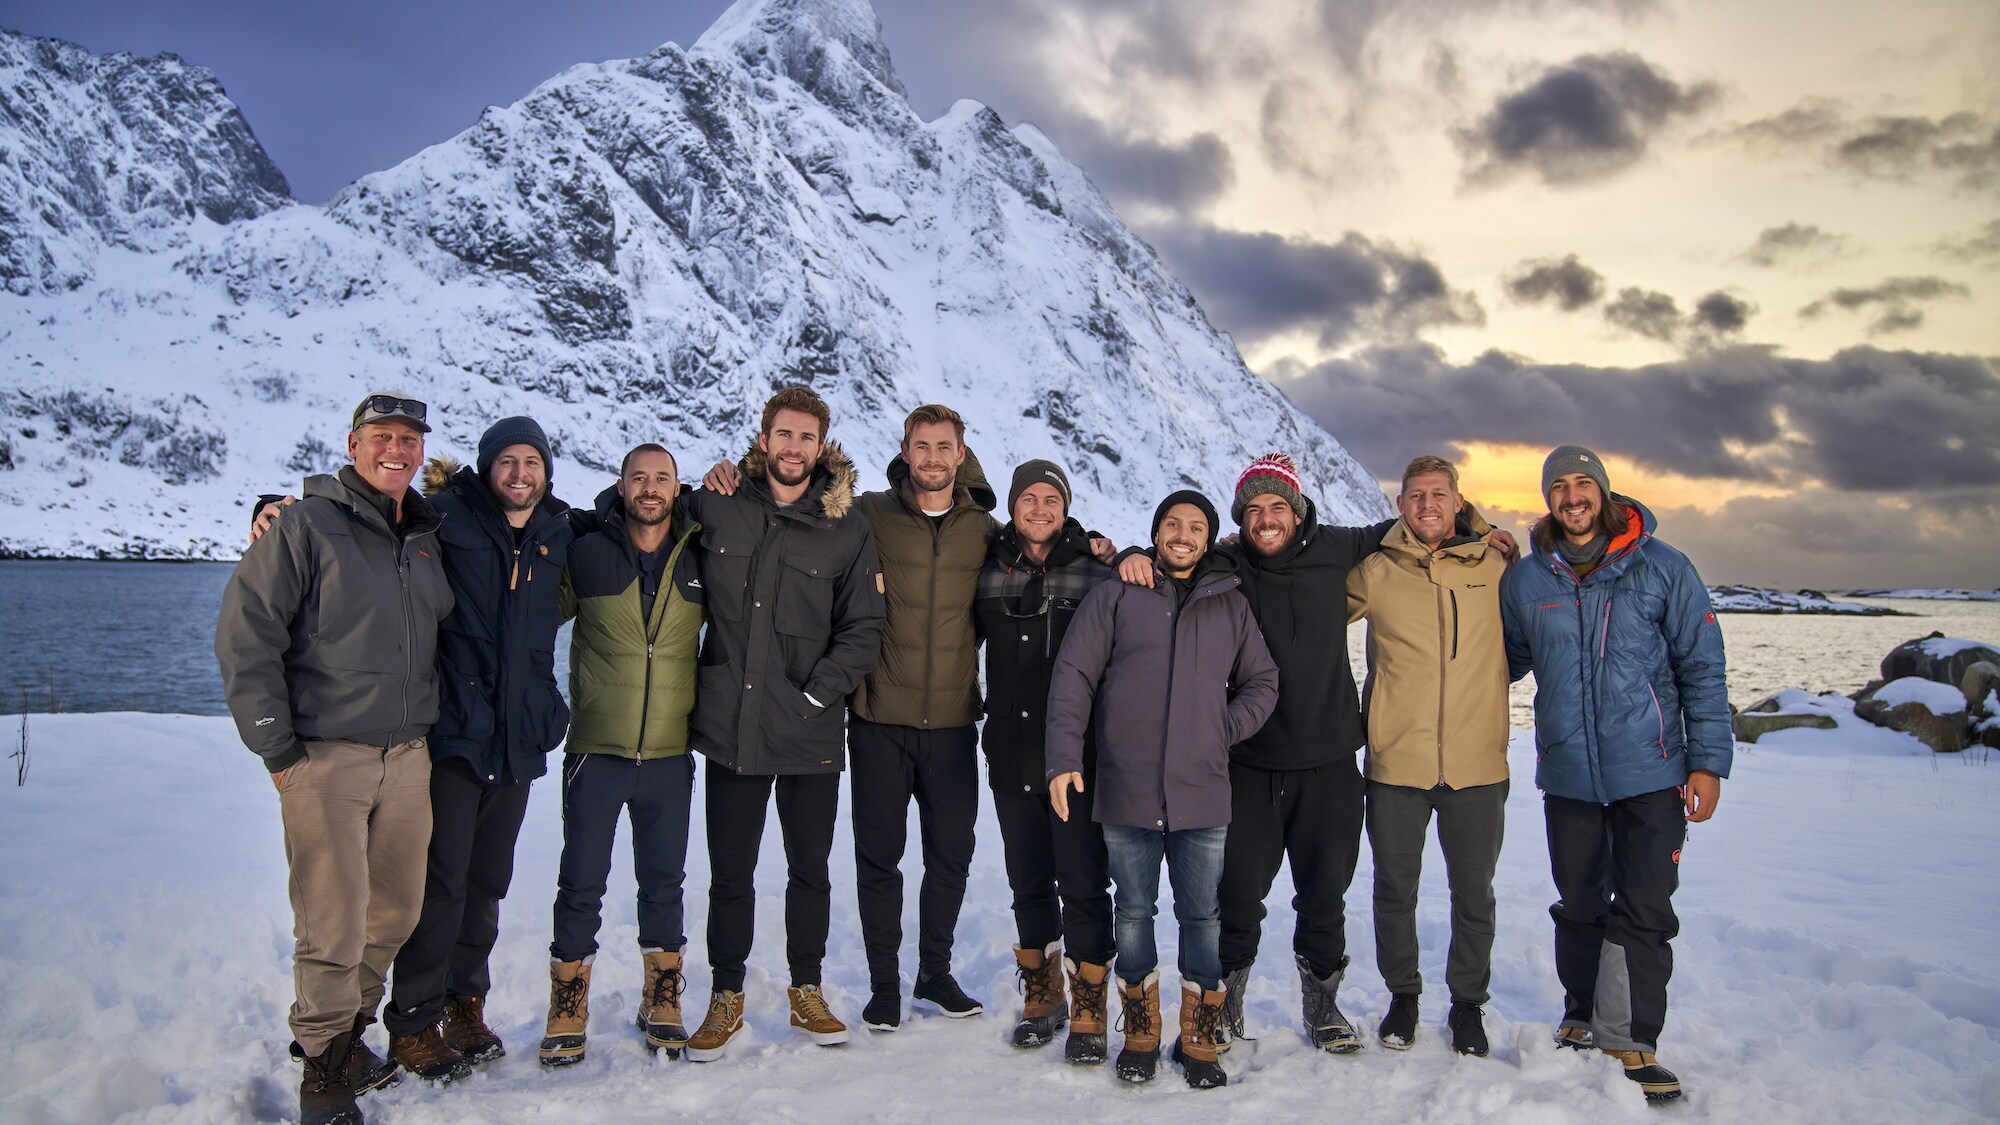 From left: Craig Parry, Ben Grayson, Aaron Grist, Liam Hemsworth, Chris Hemsworth, Luke Hemsworth, Luke Zocchi, Ross Edgley, Mick Fanning, Cristian Prieto in Norway.  (photo credit: National Geographic for Disney+/Craig Parry)